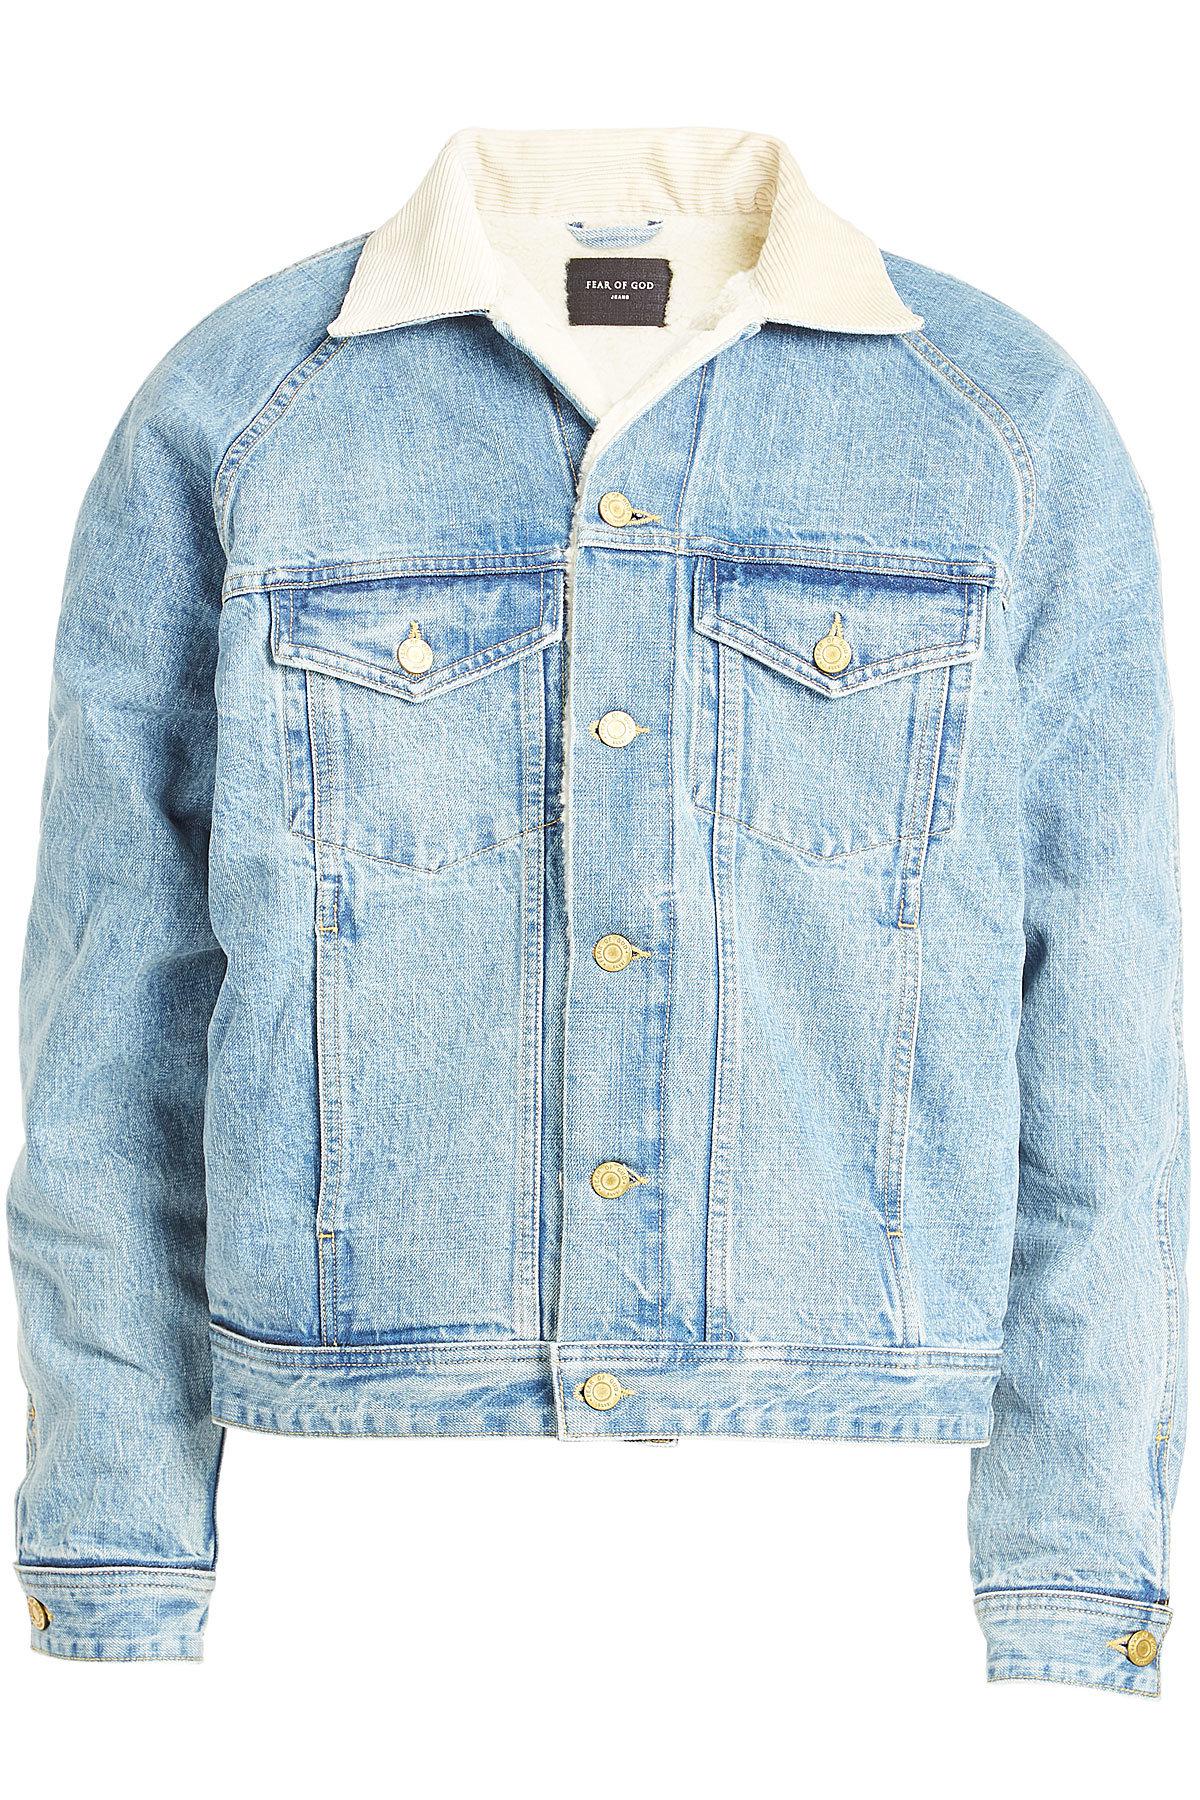 Fear Of God Denim Jacket With Textured Lining in Blue for Men - Lyst